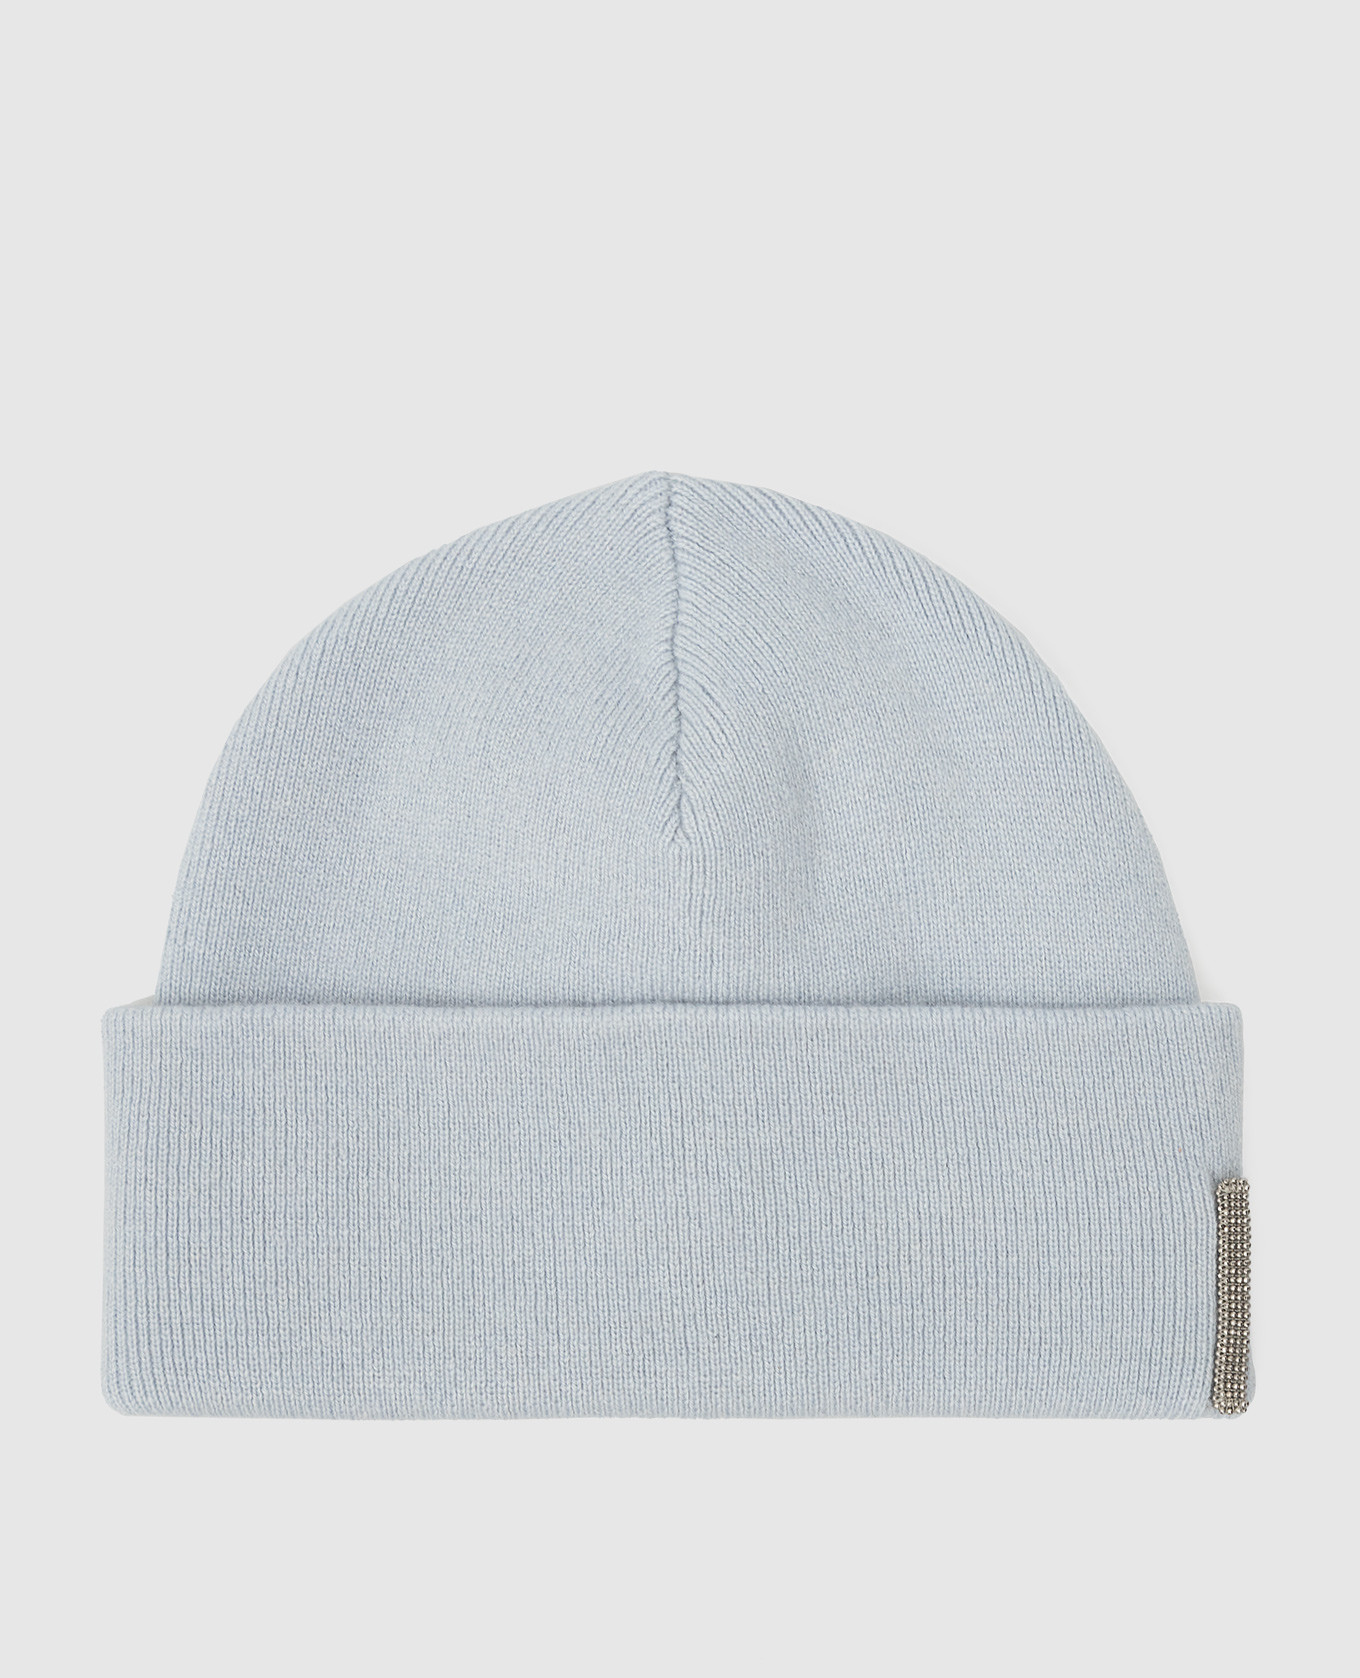 Baby blue cashmere hat with chains